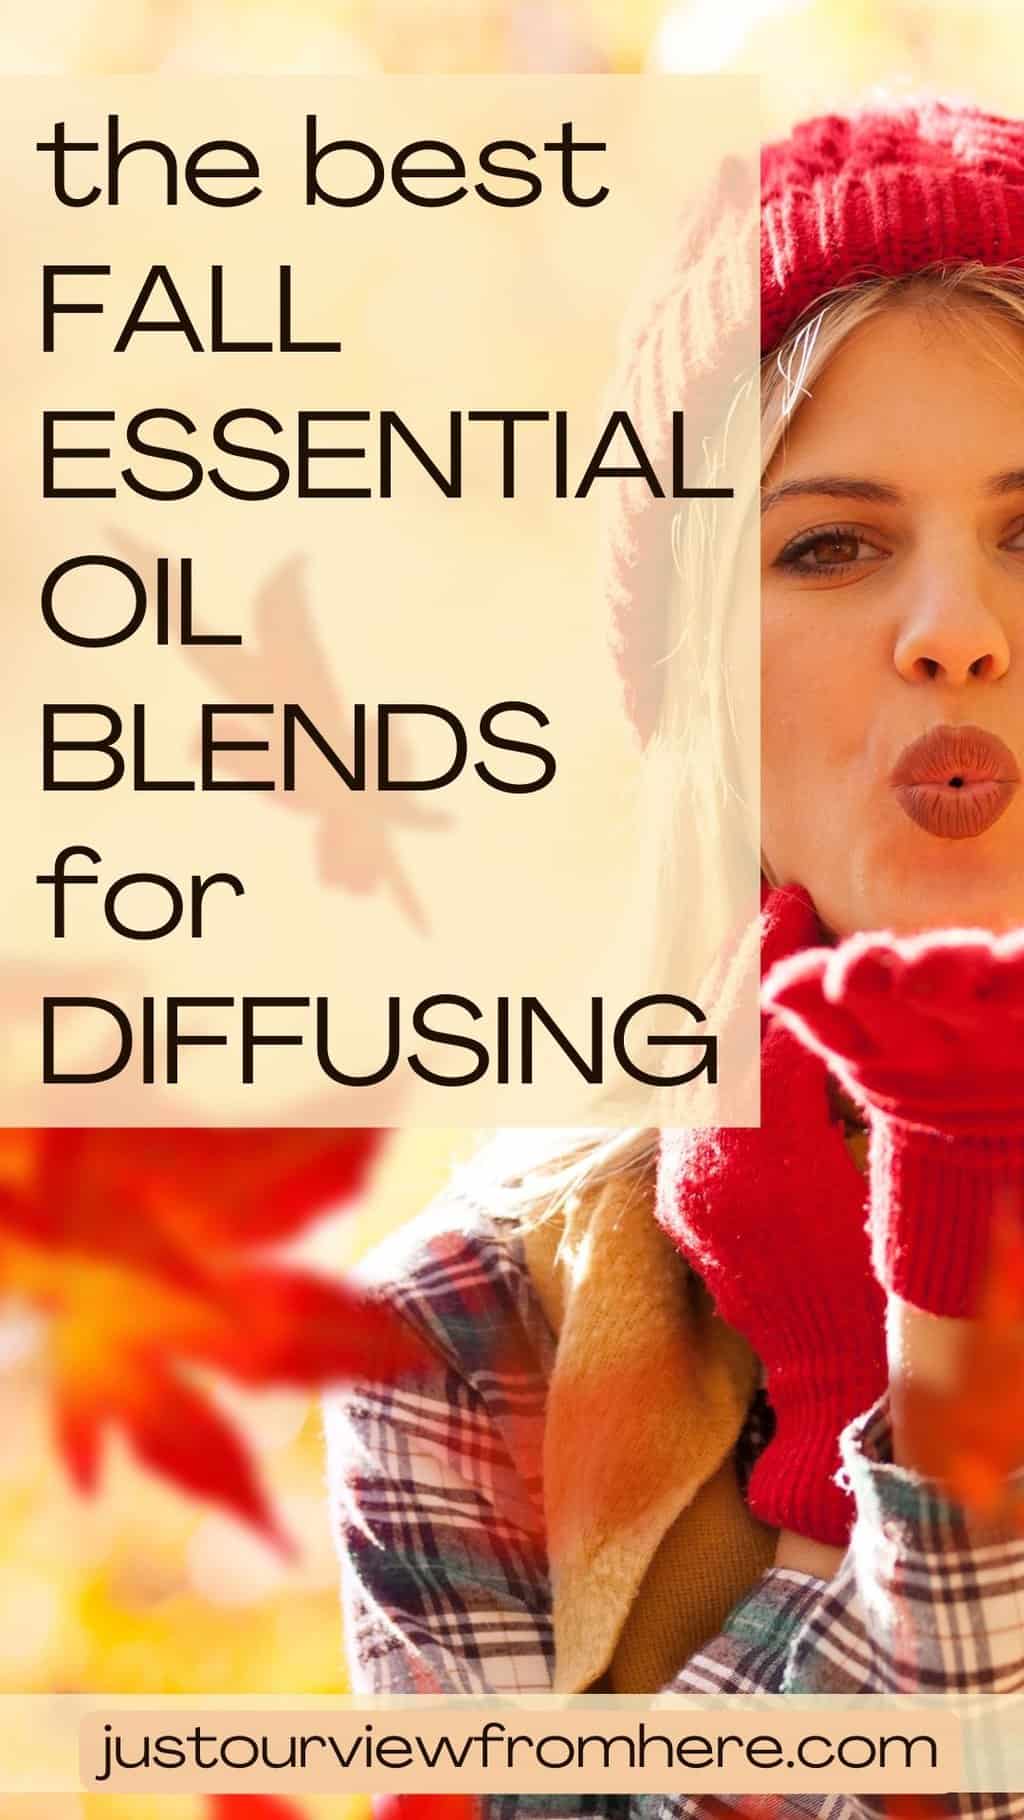 happy woman fall leaves background, text overlay the best fall essential oils for diffusing